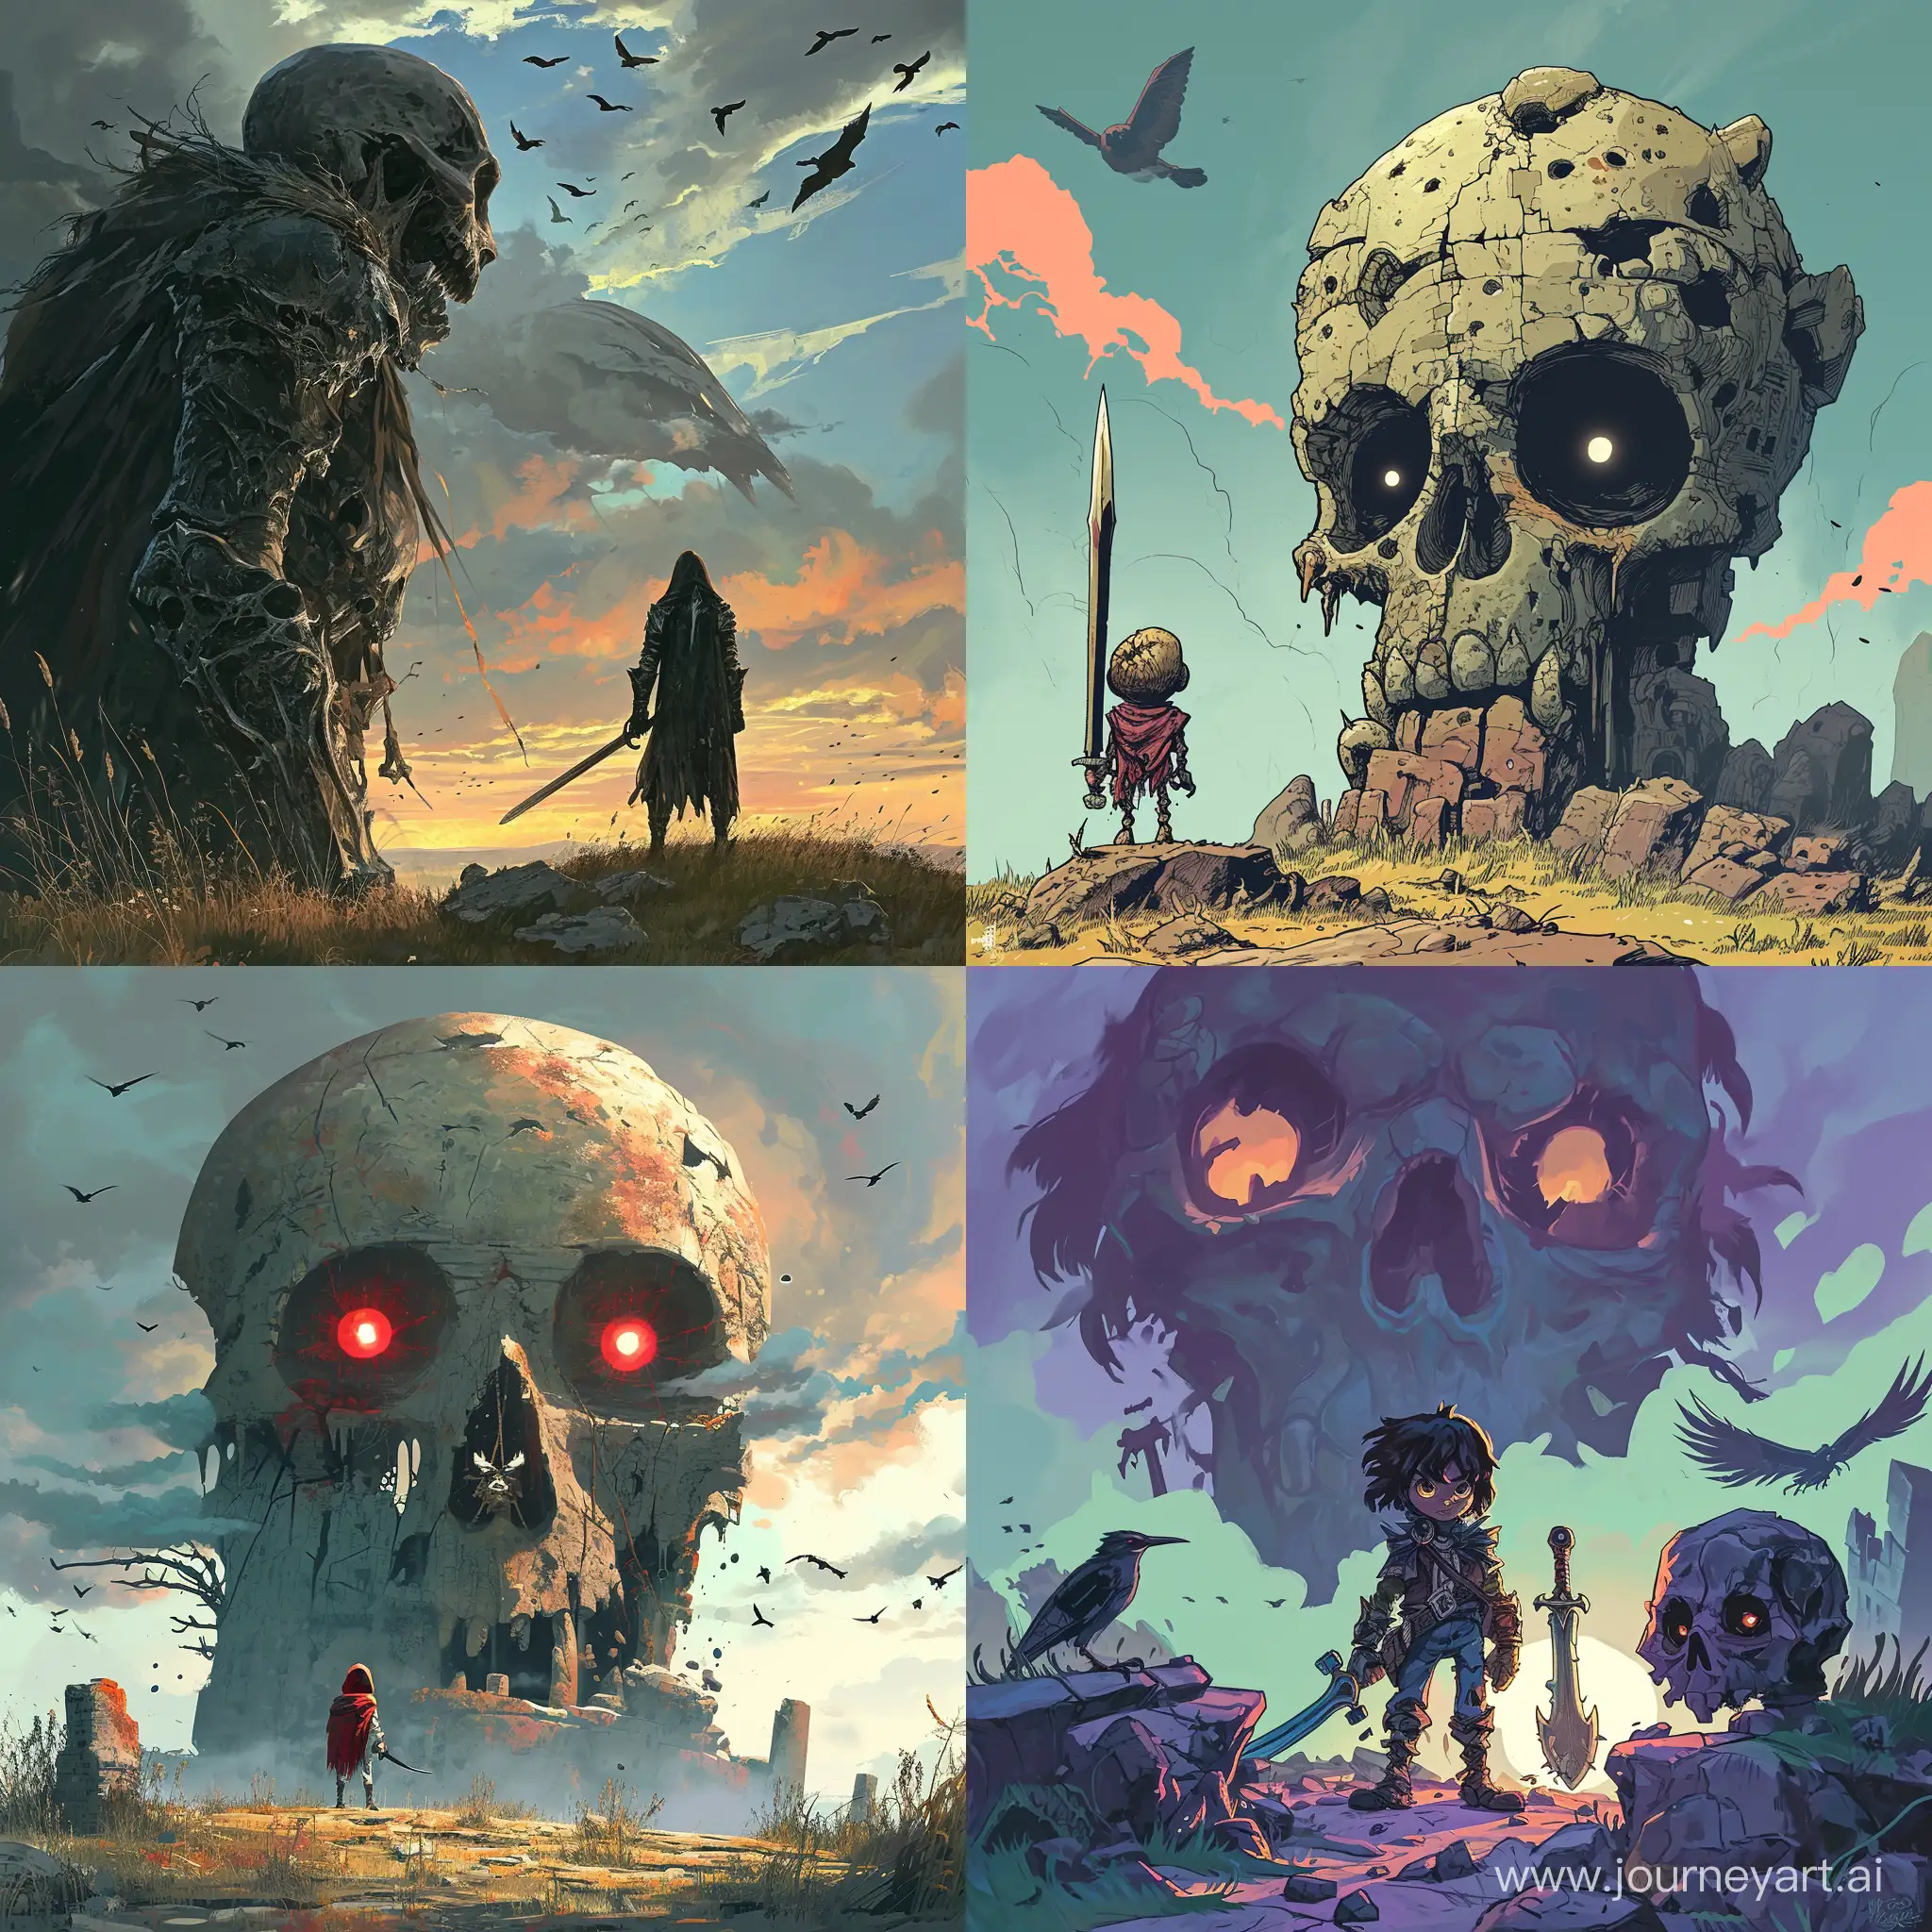 Lone-Warrior-Confronts-Ominous-Skull-in-Desolate-Dusk